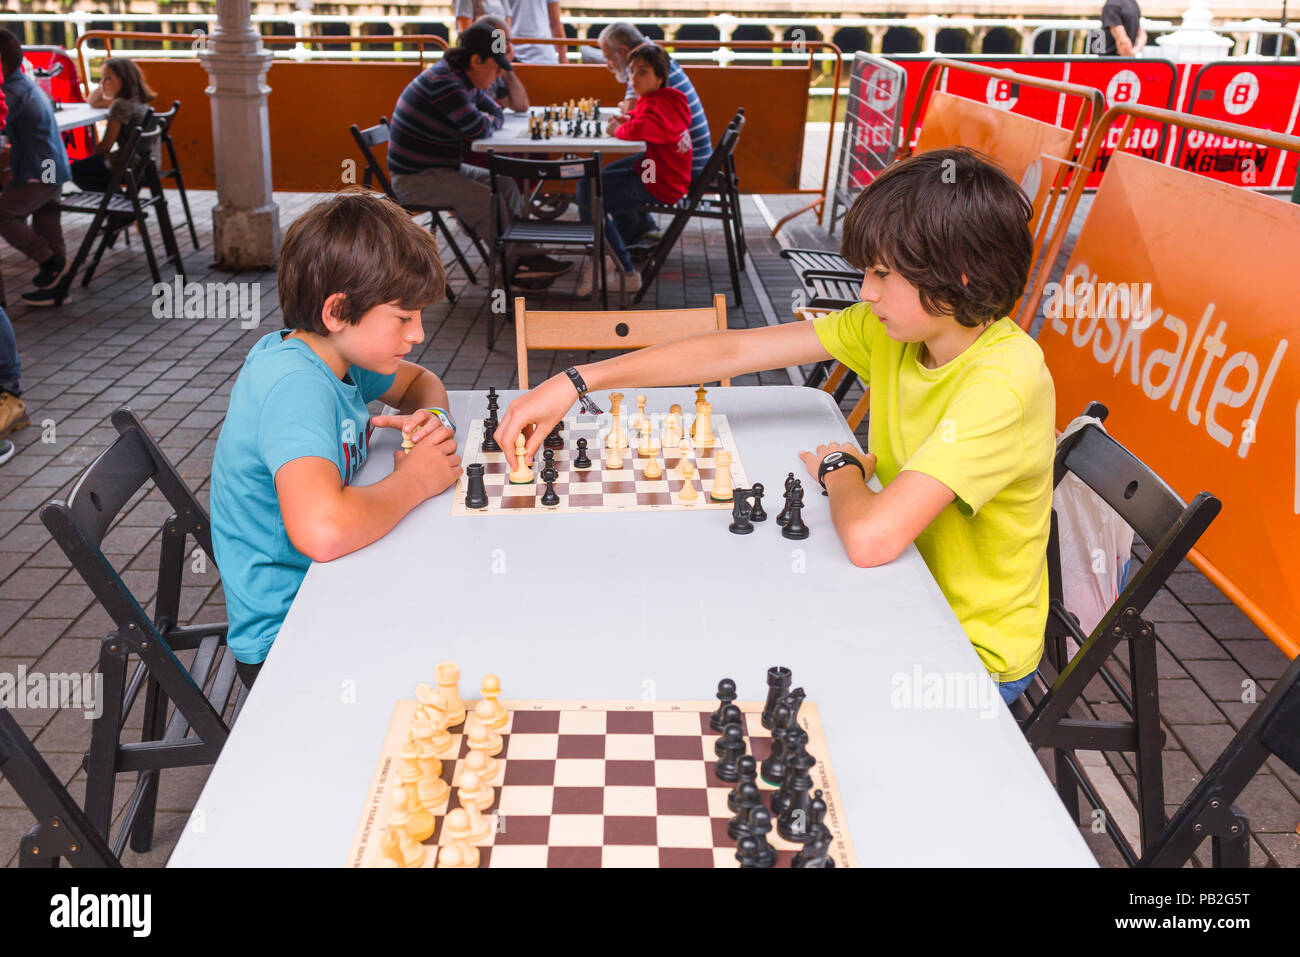 Boys chess competition, view of two boys aged 9-12 playing chess in a local tournament held in the city of Bilbao, Northern Spain. Stock Photo